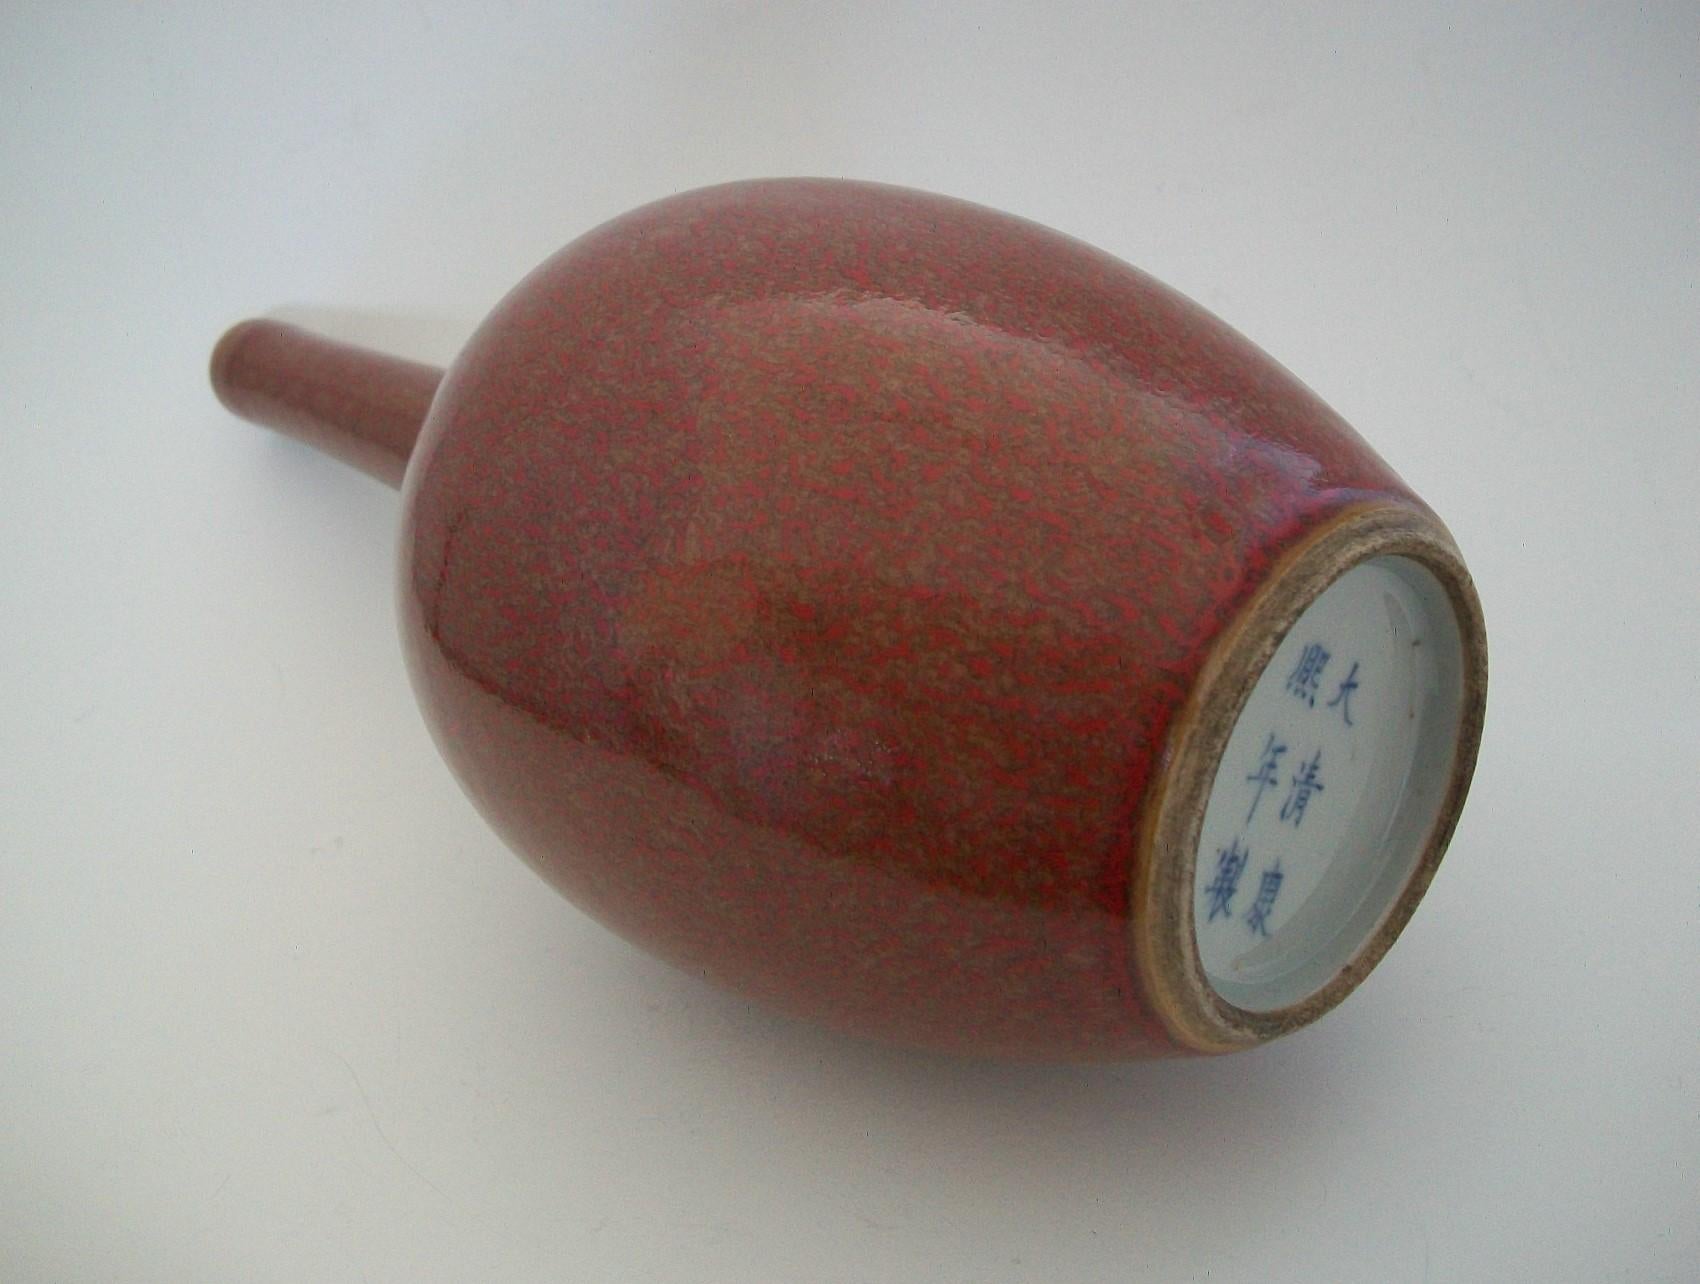 Qing Peach-Bloom Bottle Neck Vase, Six Character Mark, China, 19th Century For Sale 1